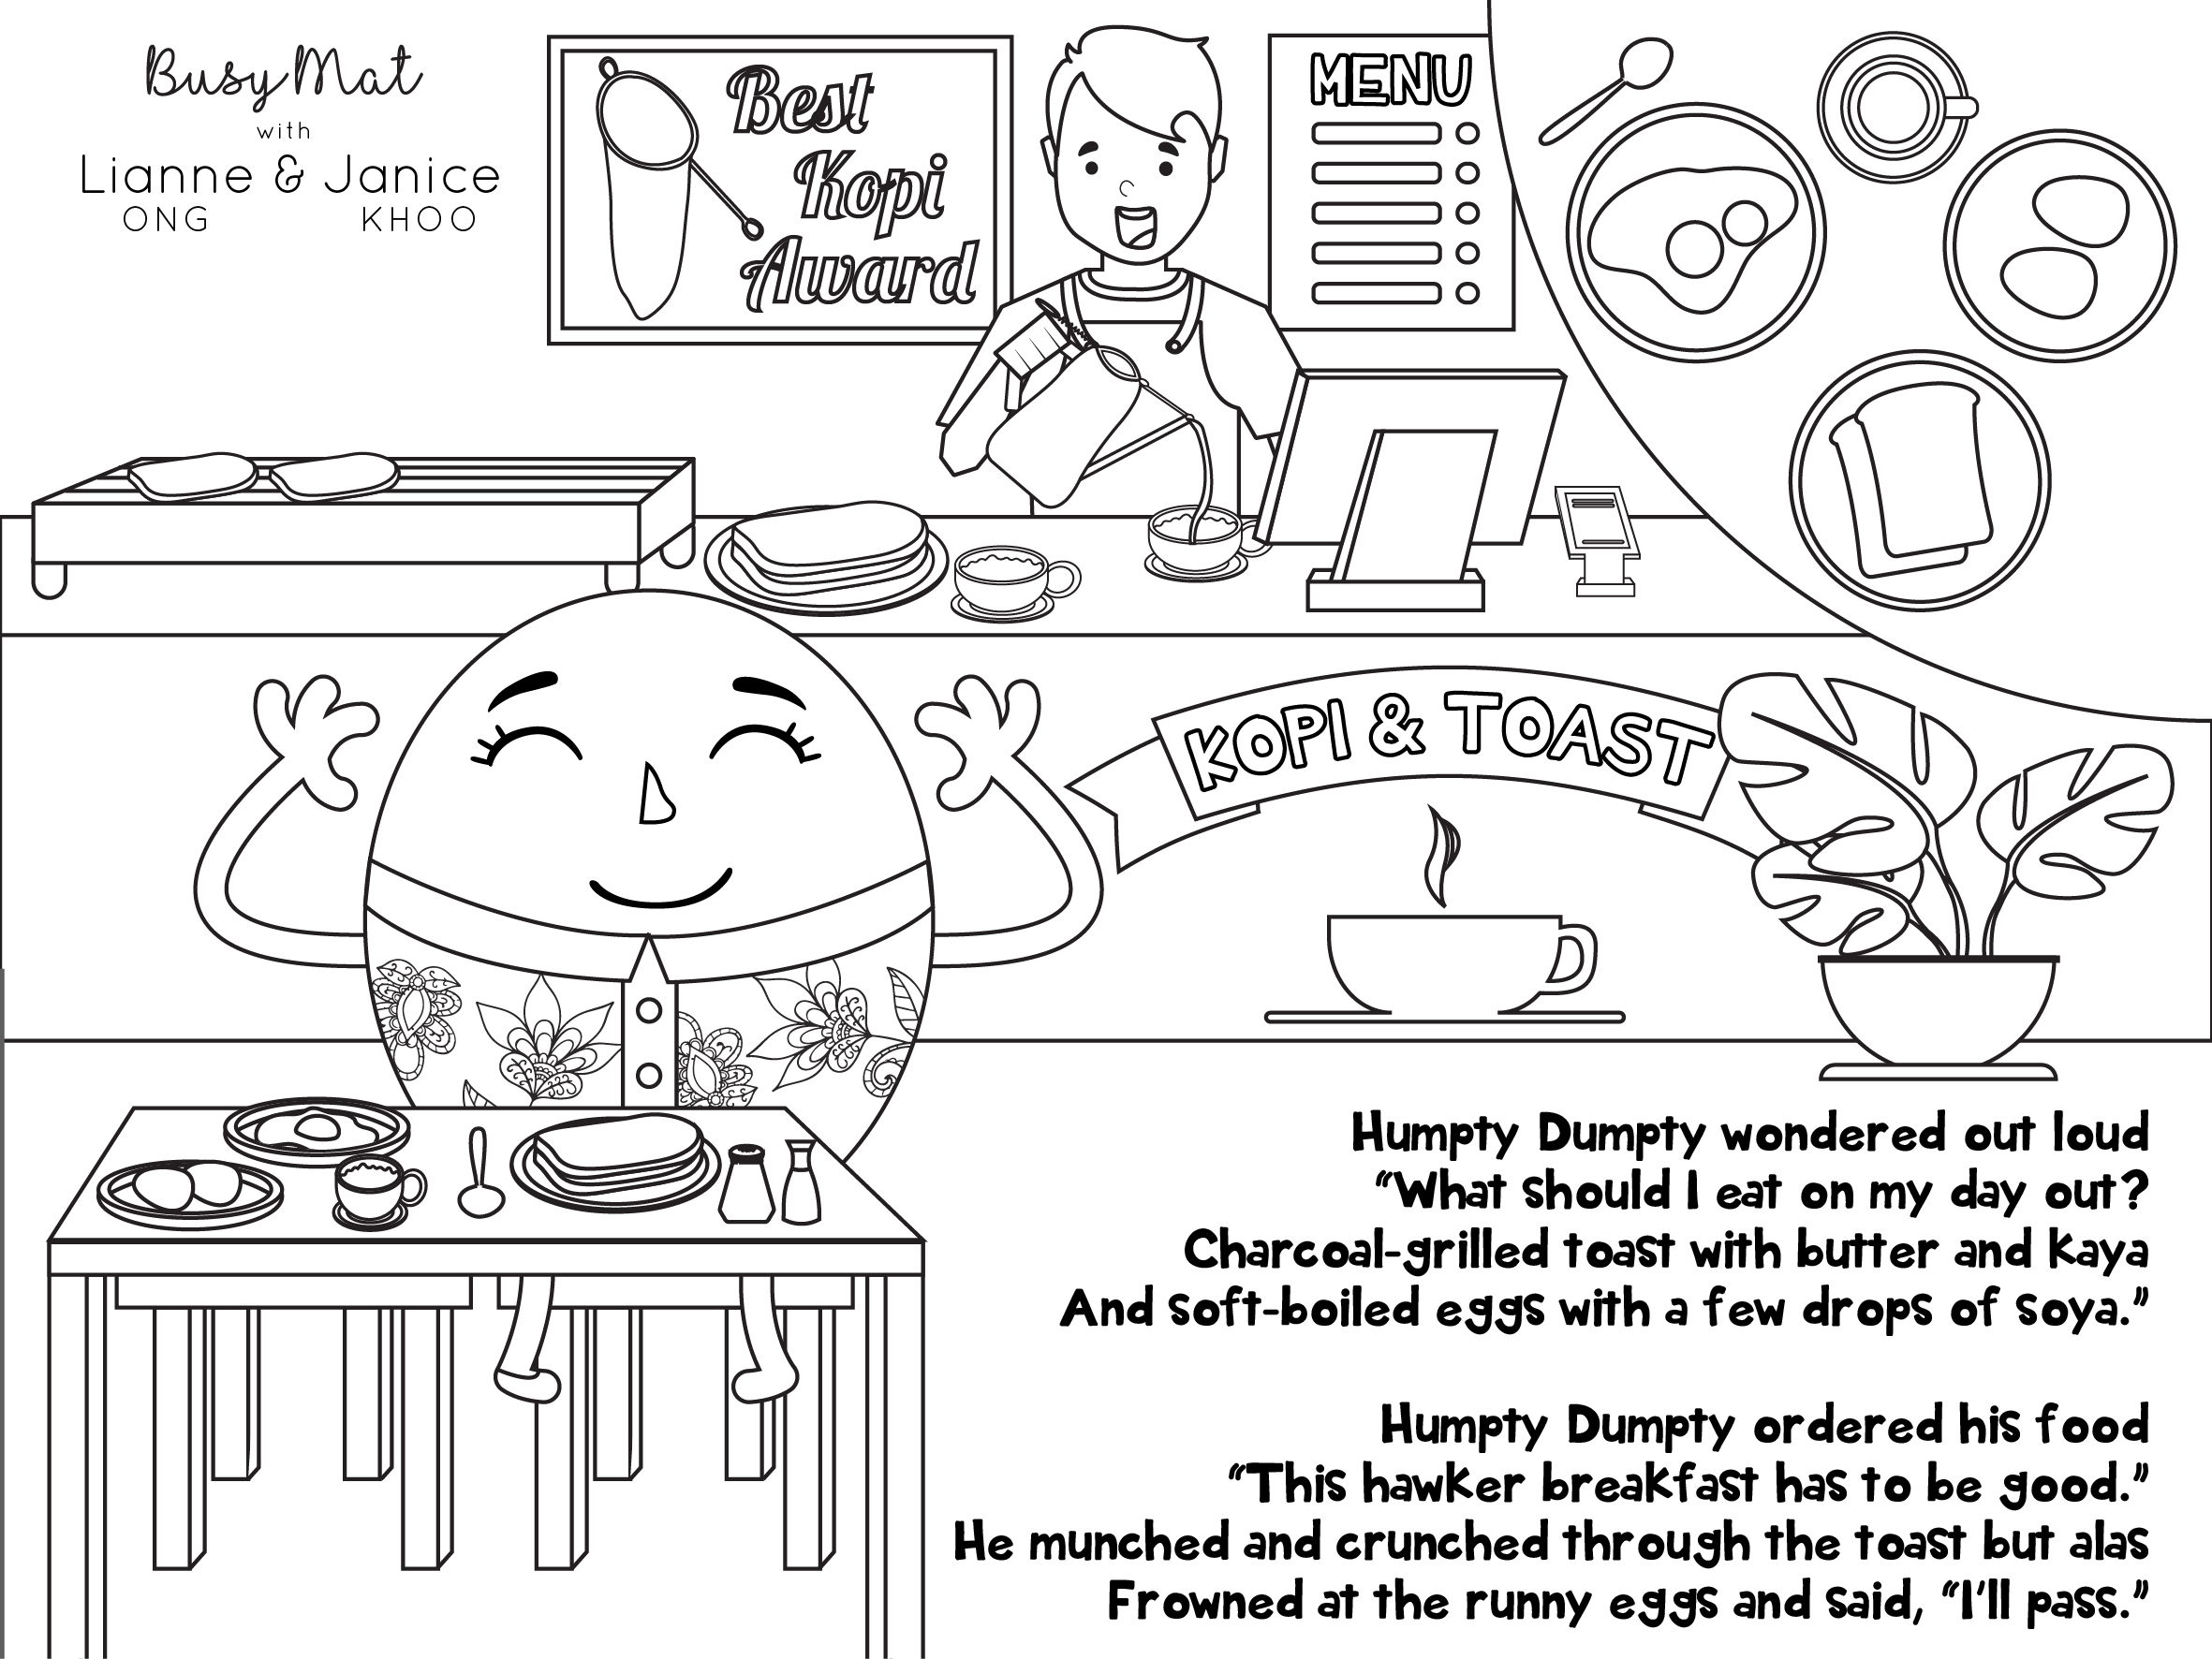 Busy Mat Singapore Hawker Food Nursery Rhyme Travel Series Placemat: Humpty Dumpty - Kopi & Toast (Placemat Only)